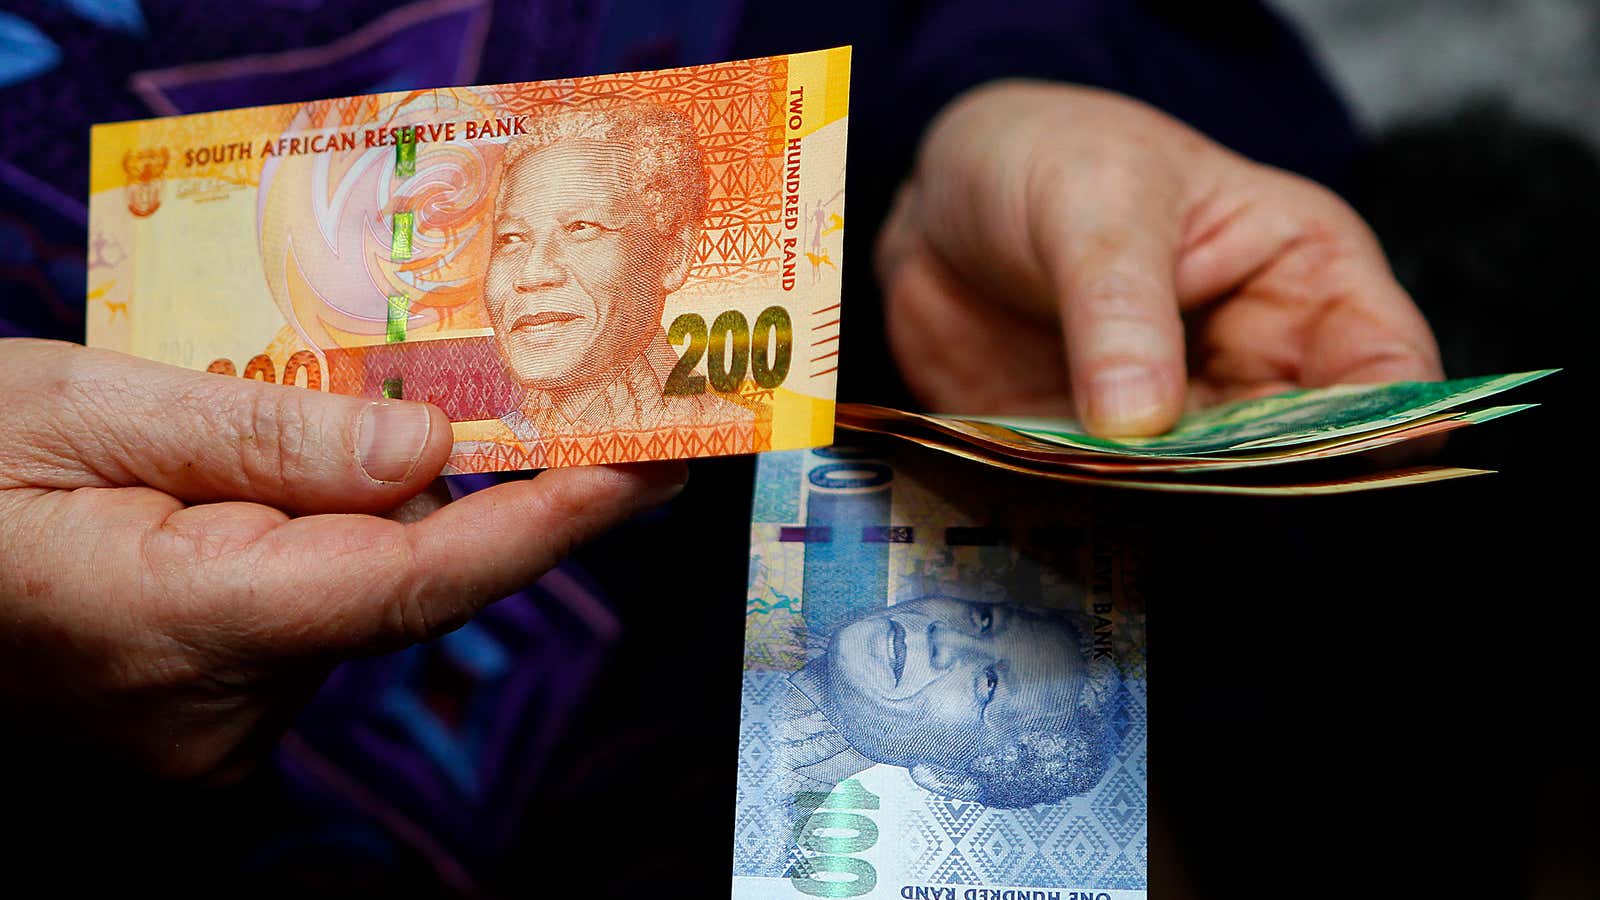 There is a 45% chance of a recession in South Africa this year